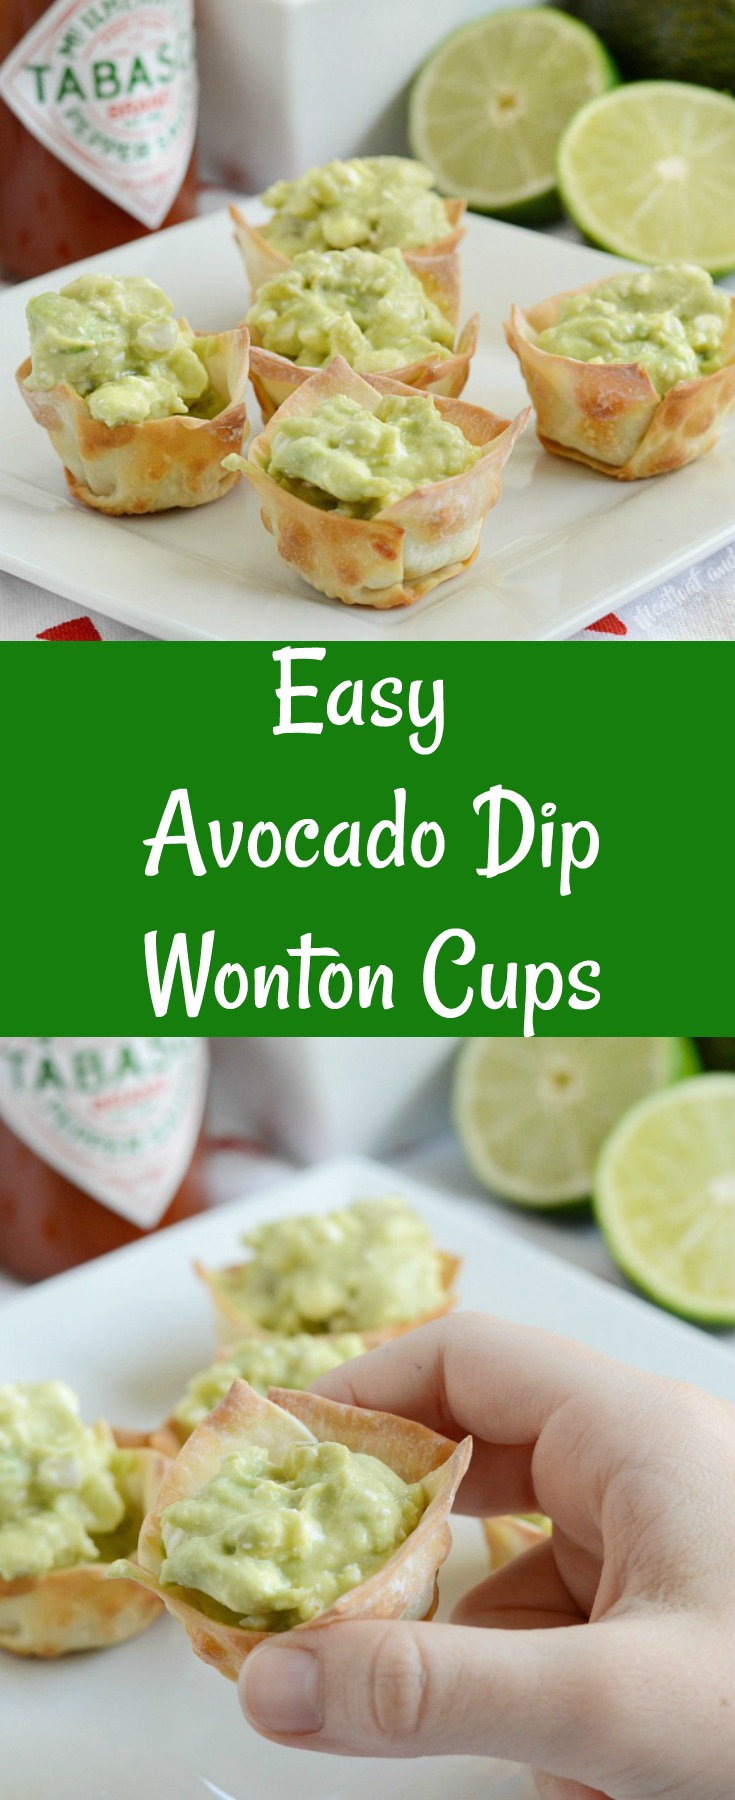 Avocado Dip Wonton Cups - Meatloaf and Melodrama